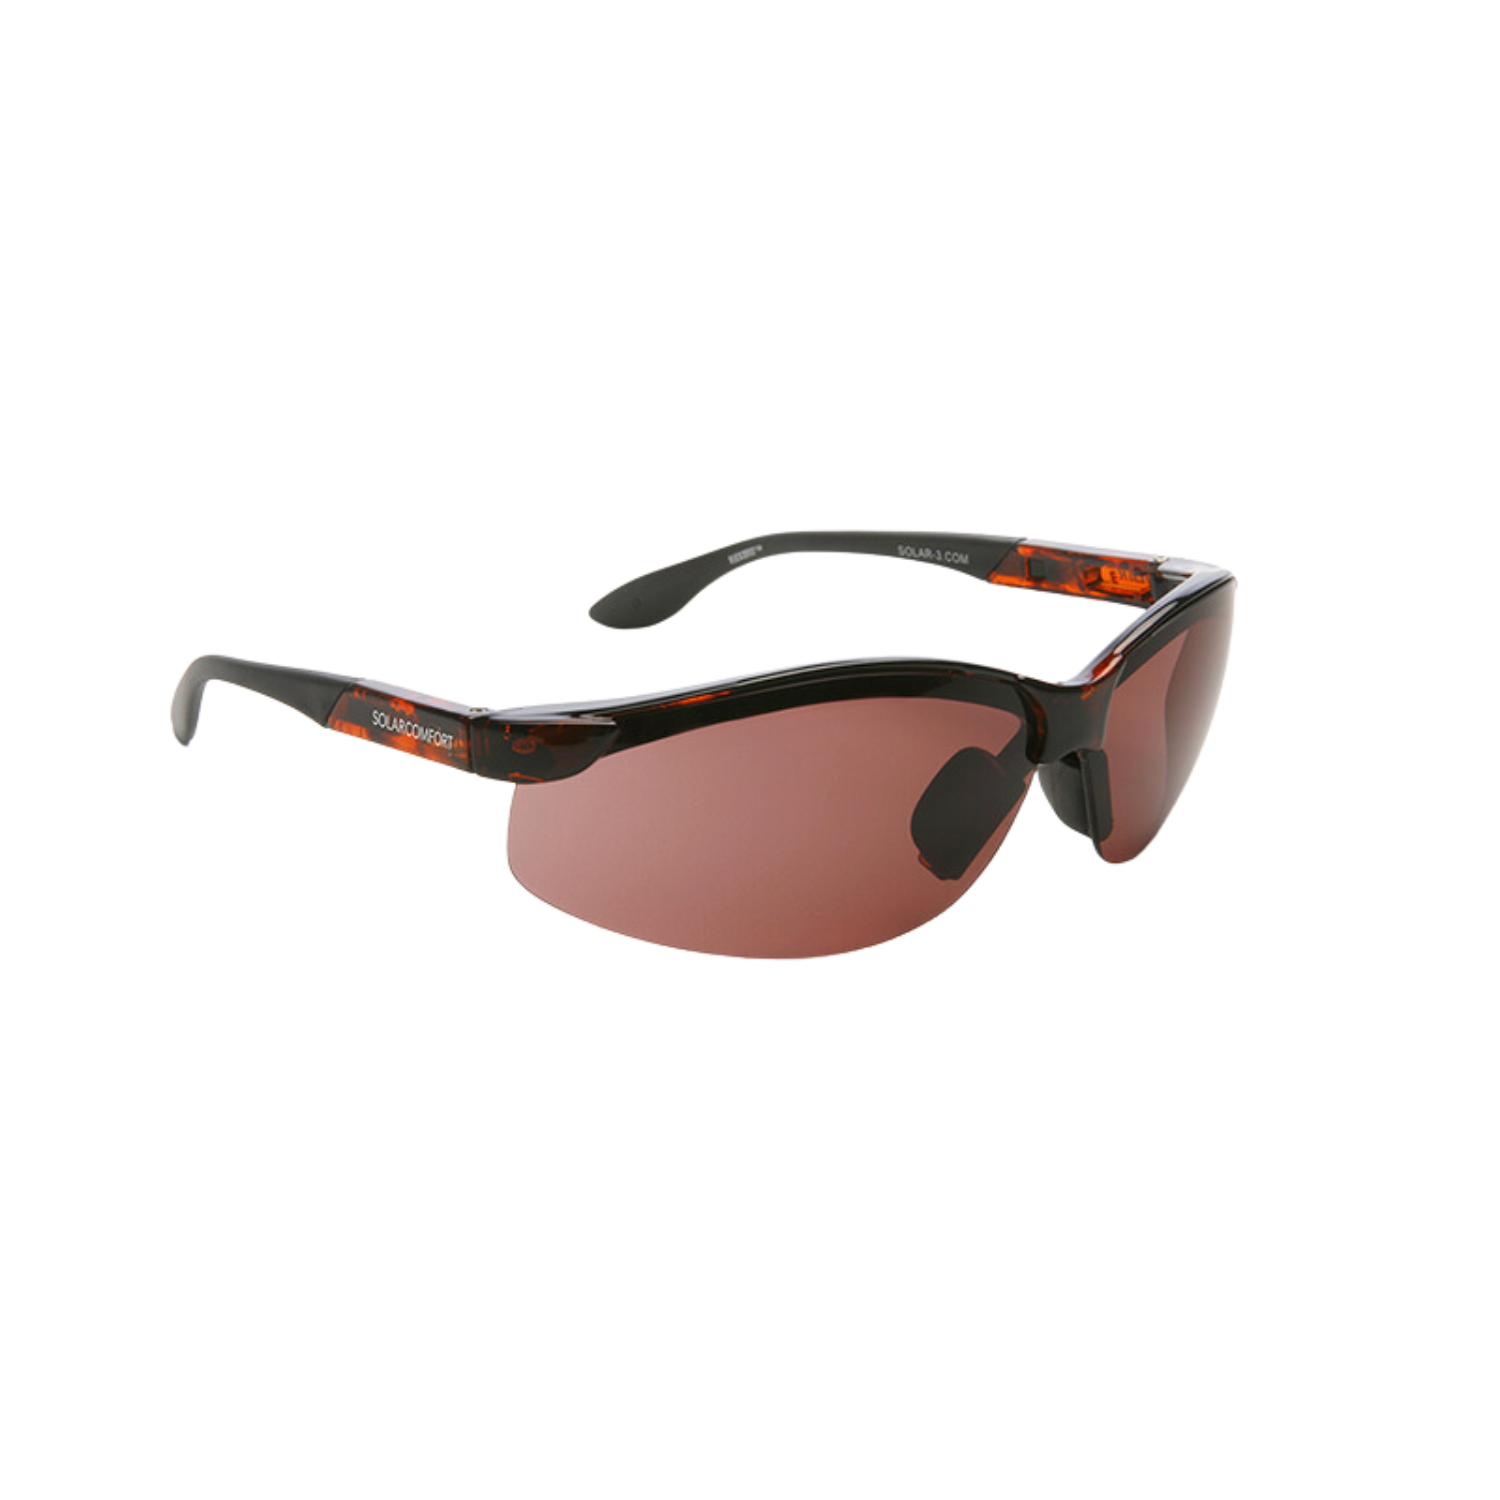 Image of the SolarComfort® Glare Reduction Sunglasses with Plum Tint from Eschenbach.